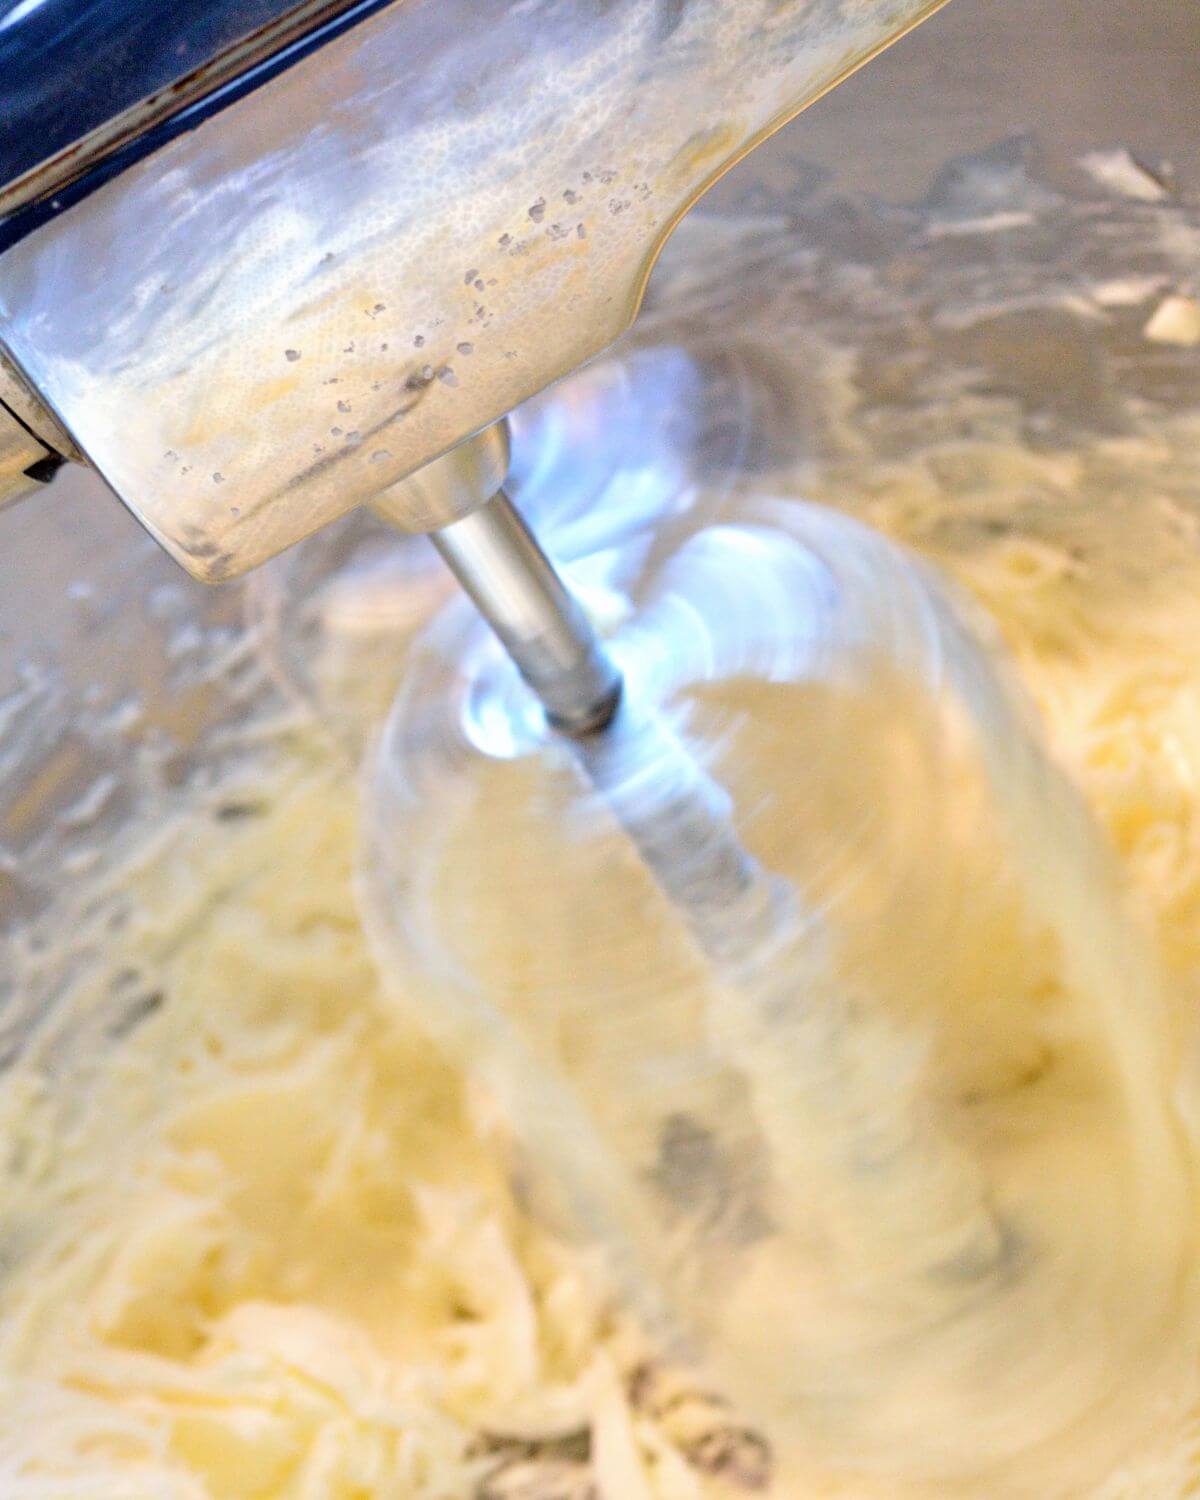 Mixing the cookie dough.